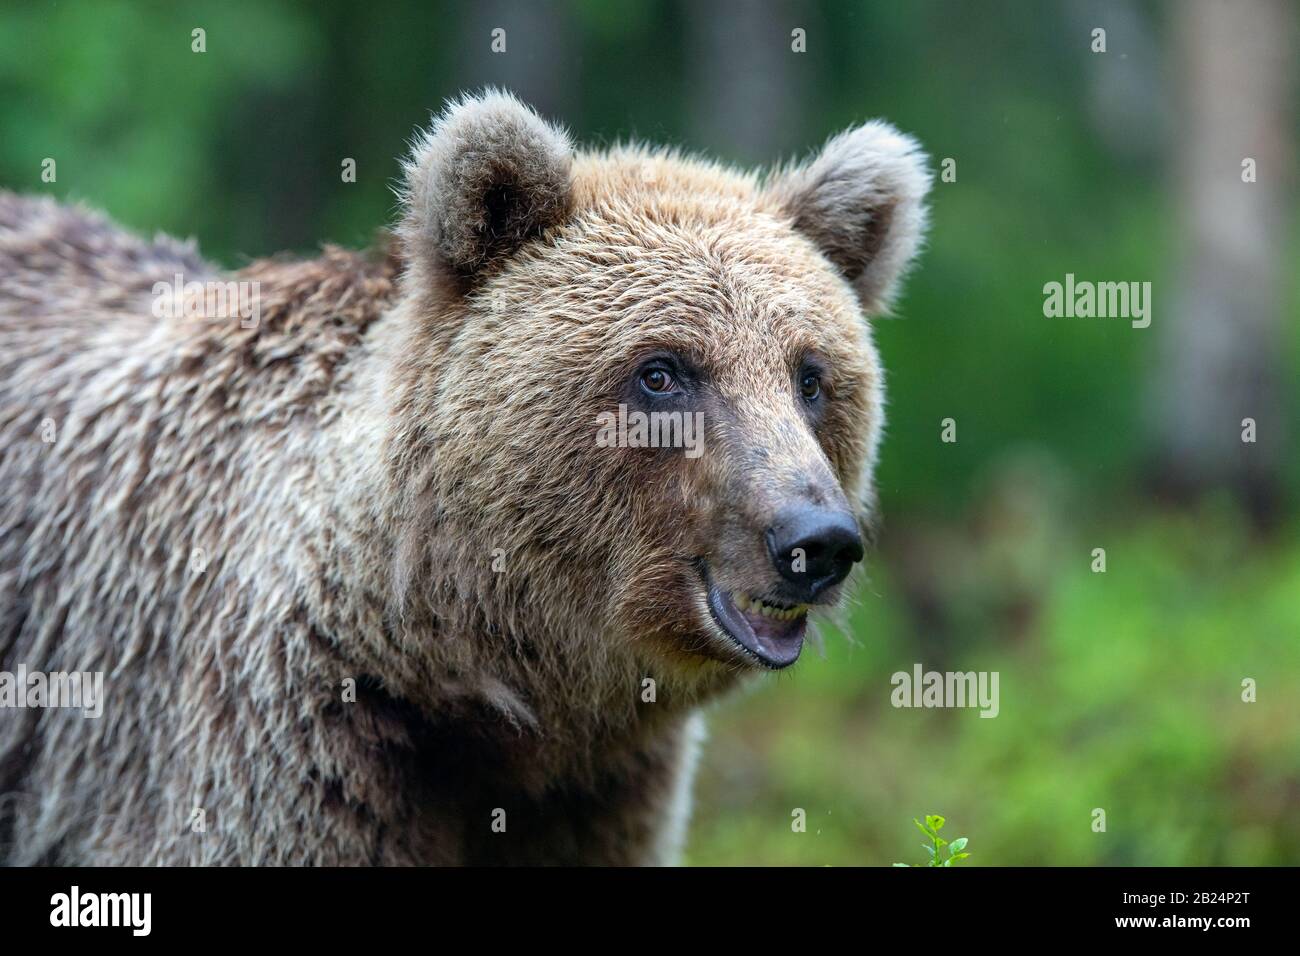 Brown bear in the summer forest. Close up portrait, green natural background. Scientific name: Ursus arctos. Natural habitat. Stock Photo